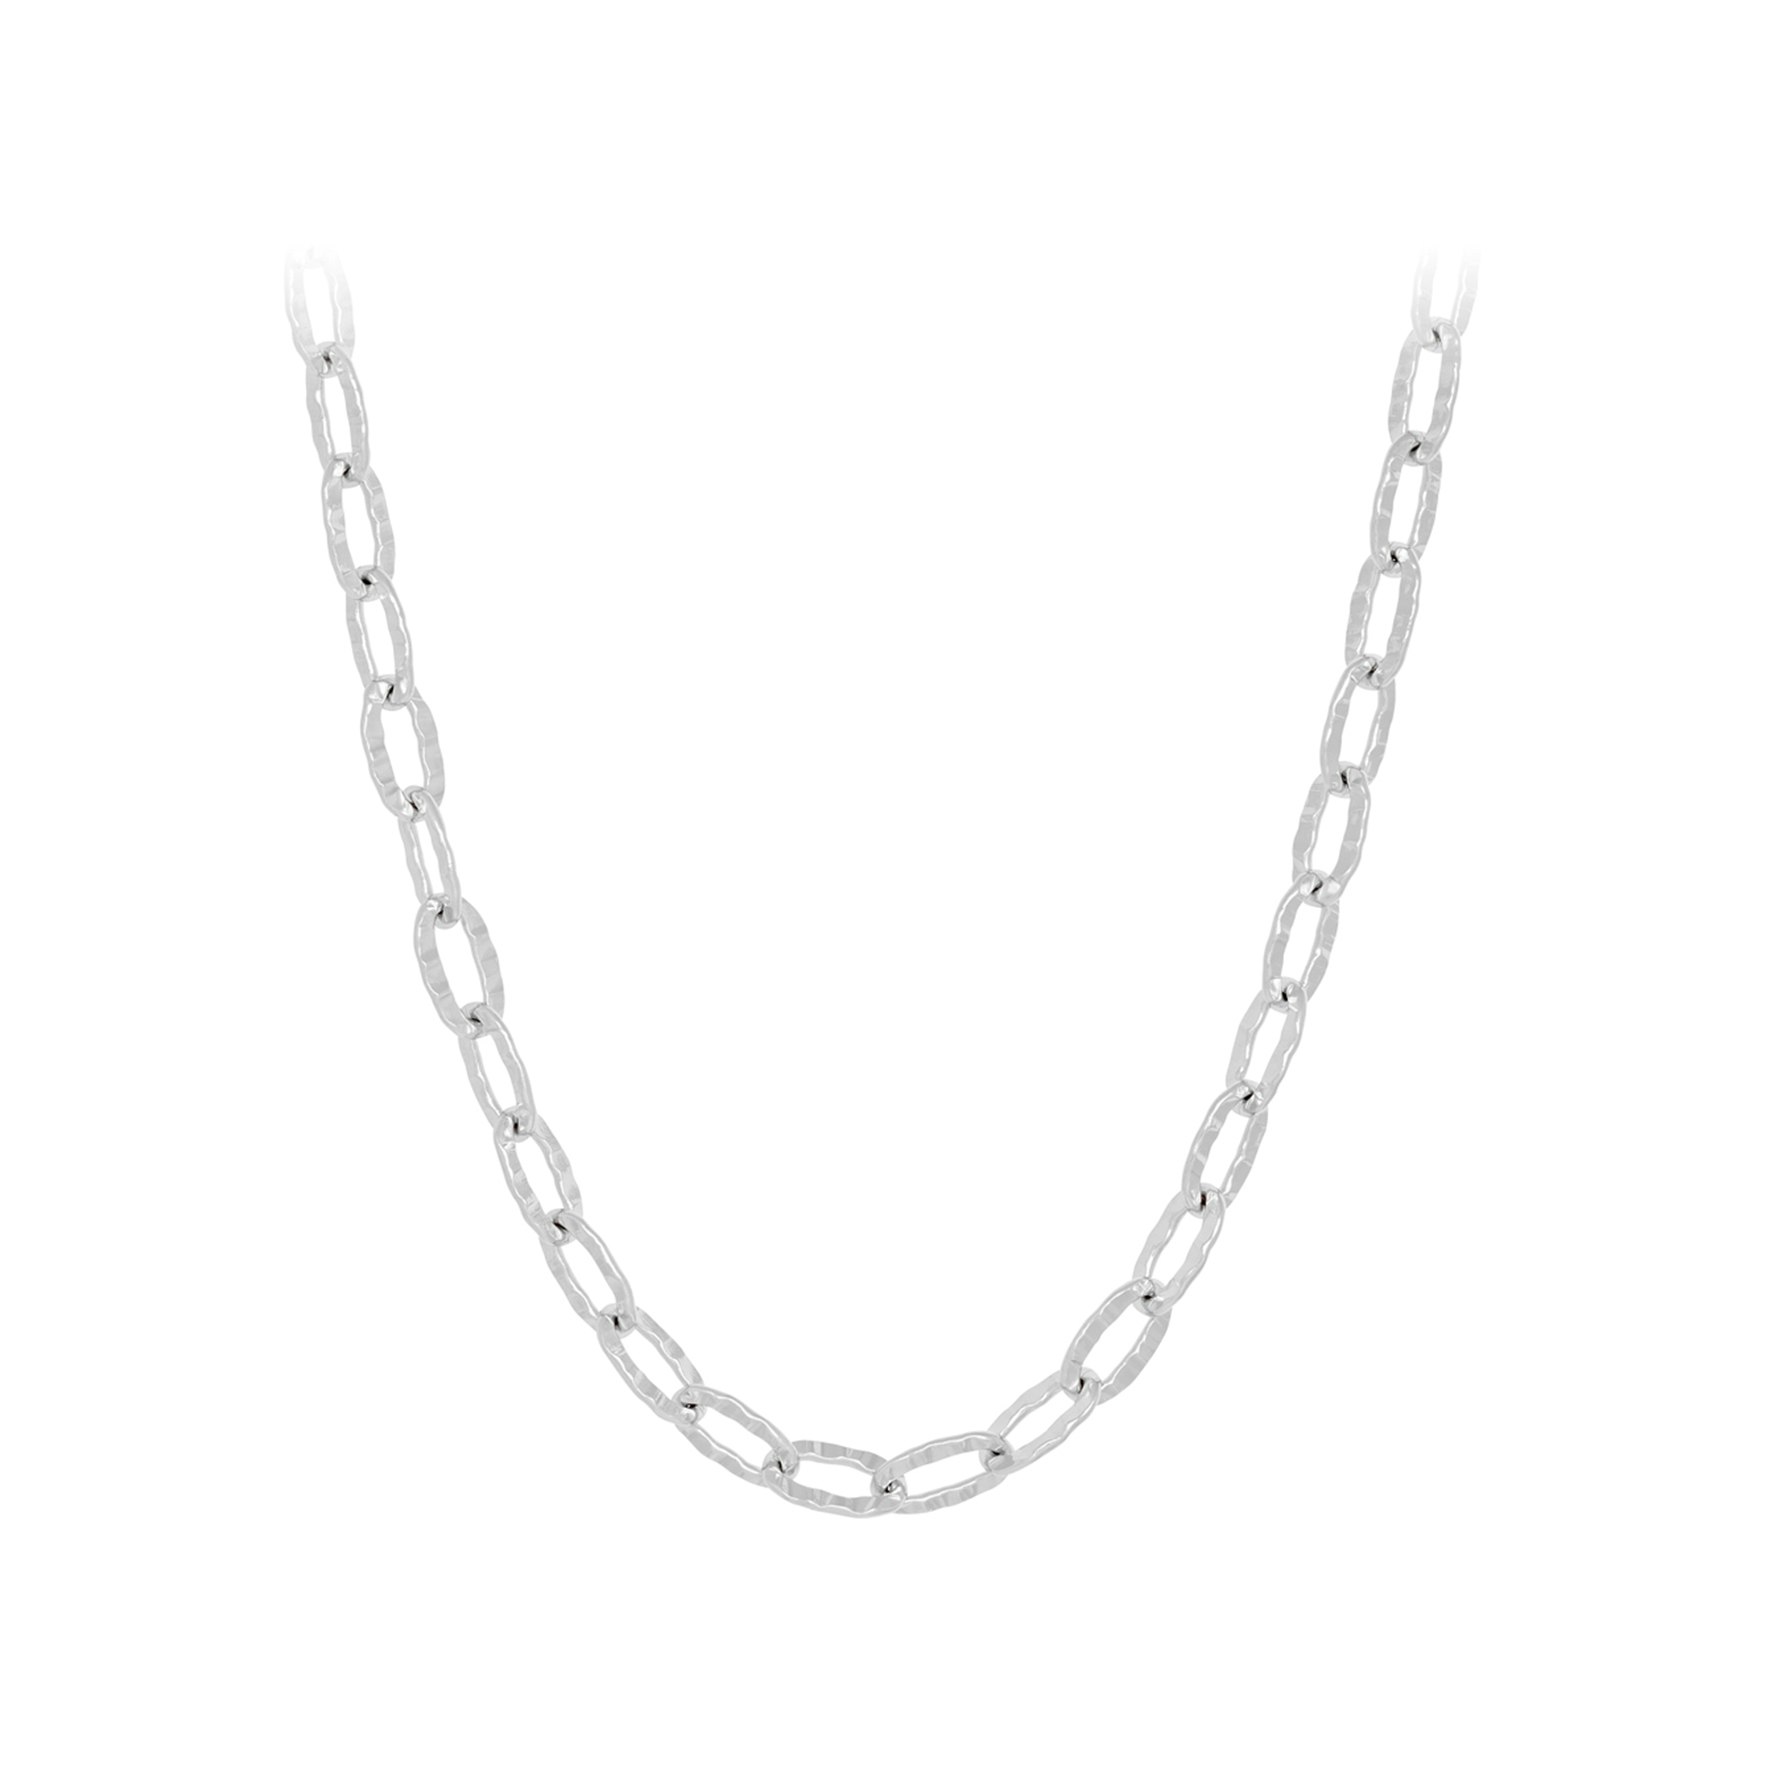 Ines Necklace von Pernille Corydon in Silber Sterling 925